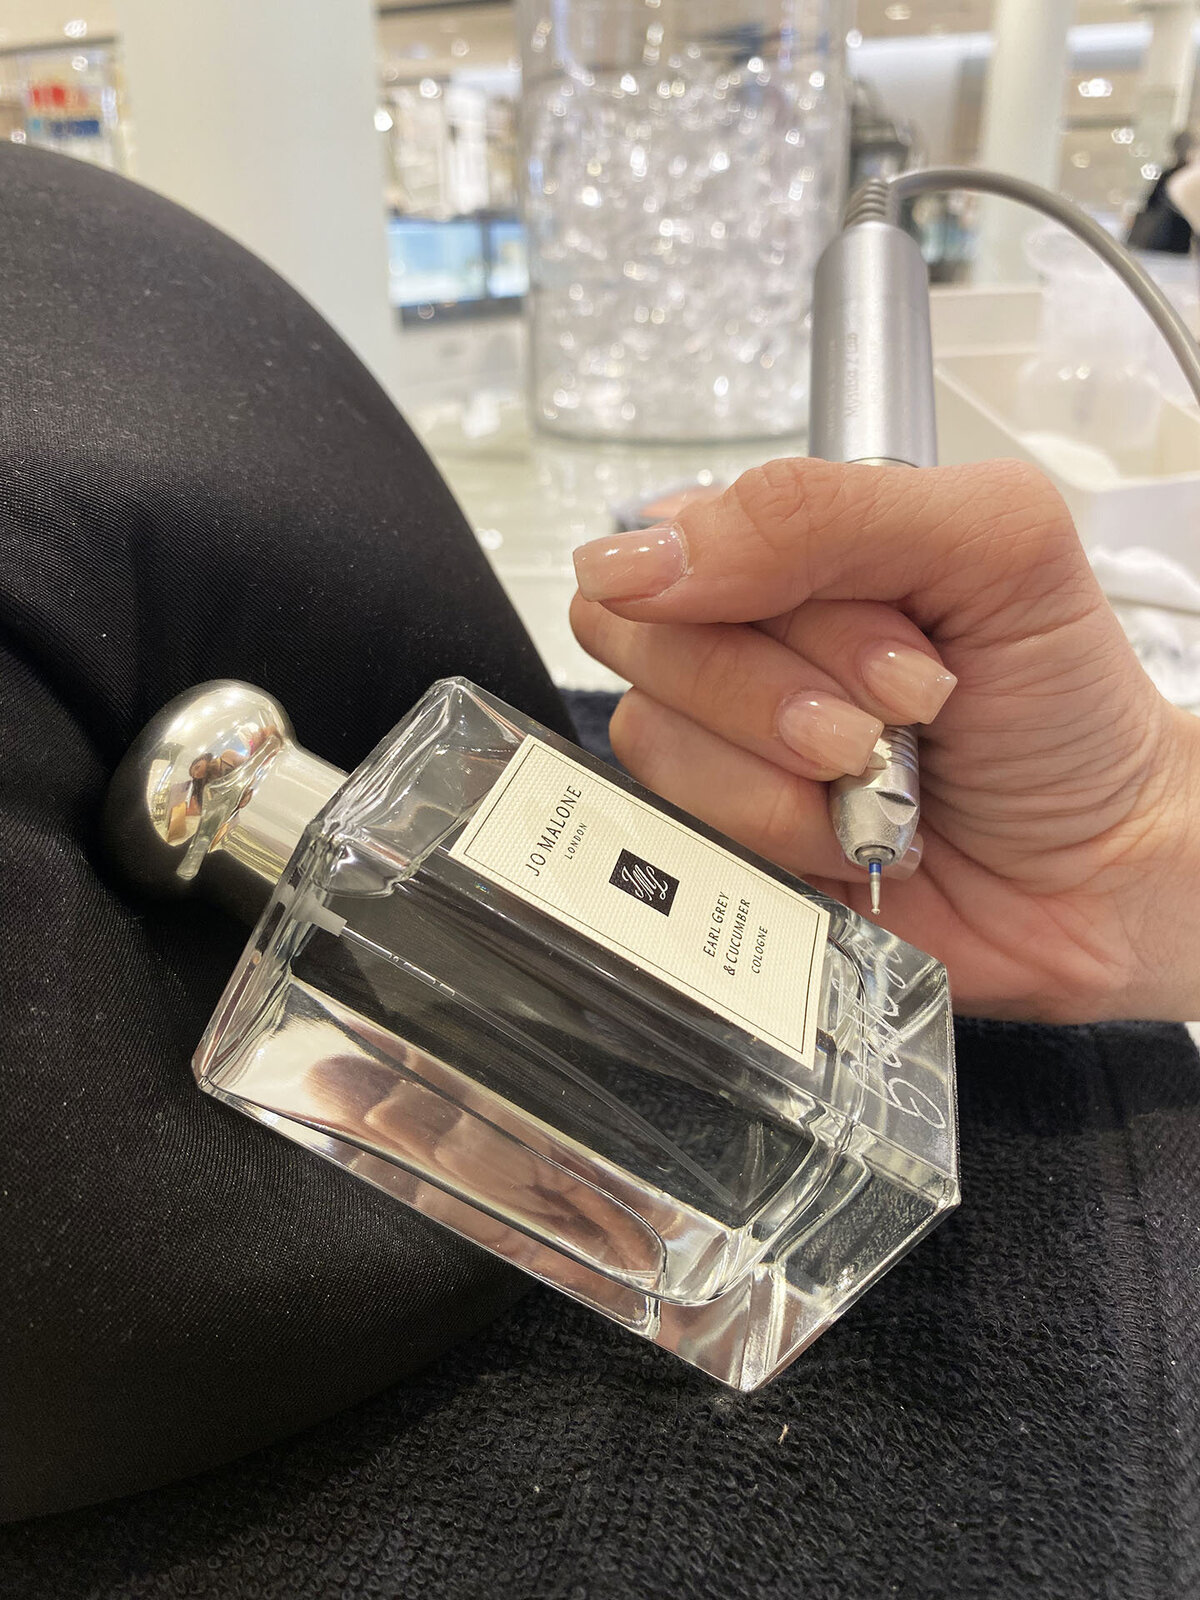 Nordstrom Jo Malone Brand Activation Live Event